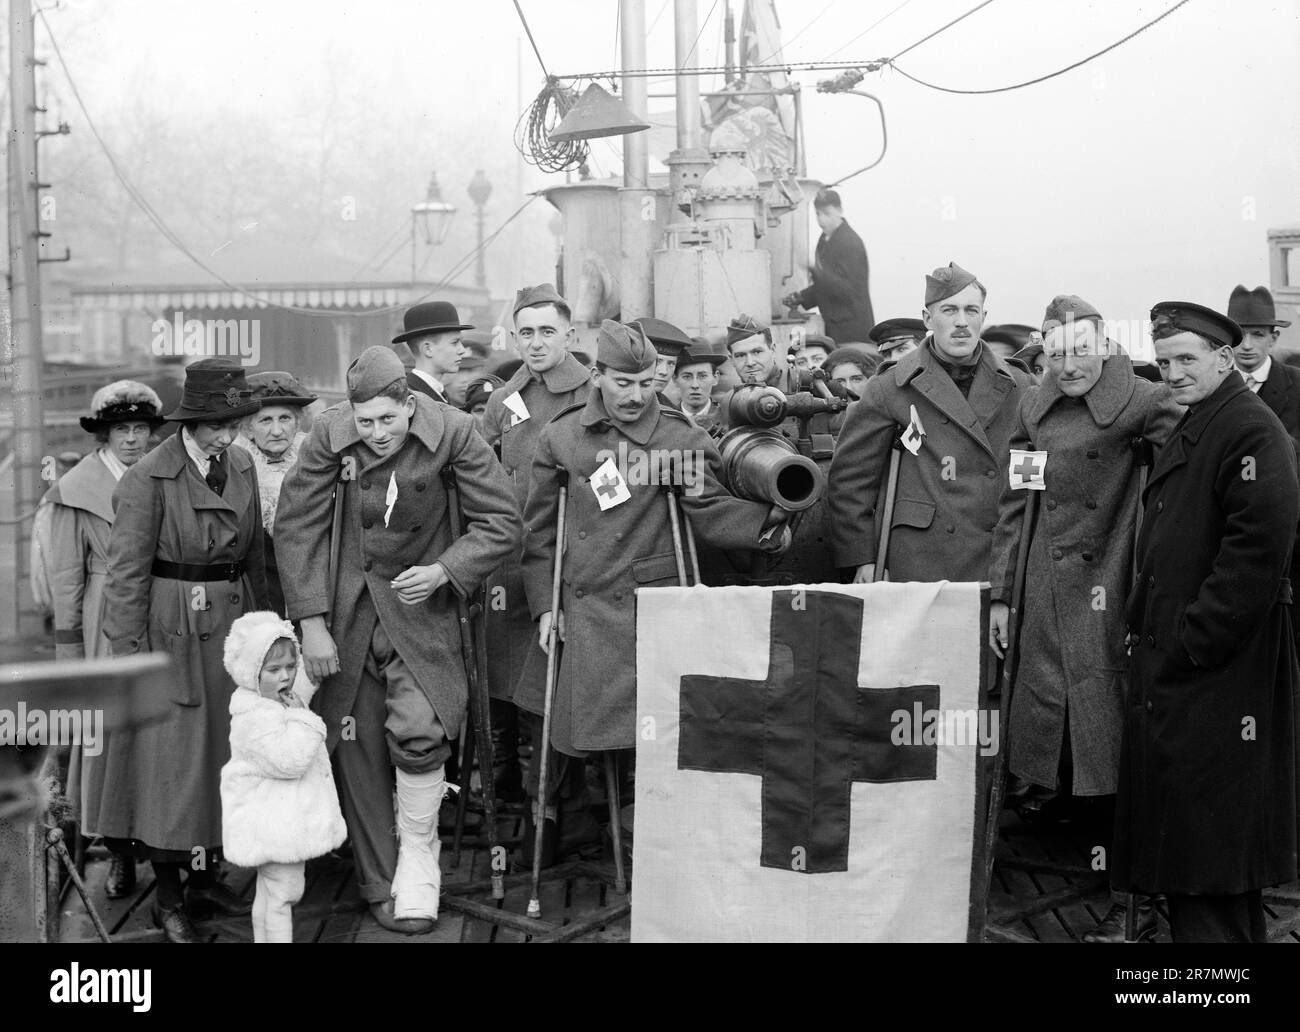 Recovering U.S. Soldiers taken to see sights, captured German U-boat, London, England, UK, American National Red Cross Photograph Collection, between 1917 and 1919 Stock Photo